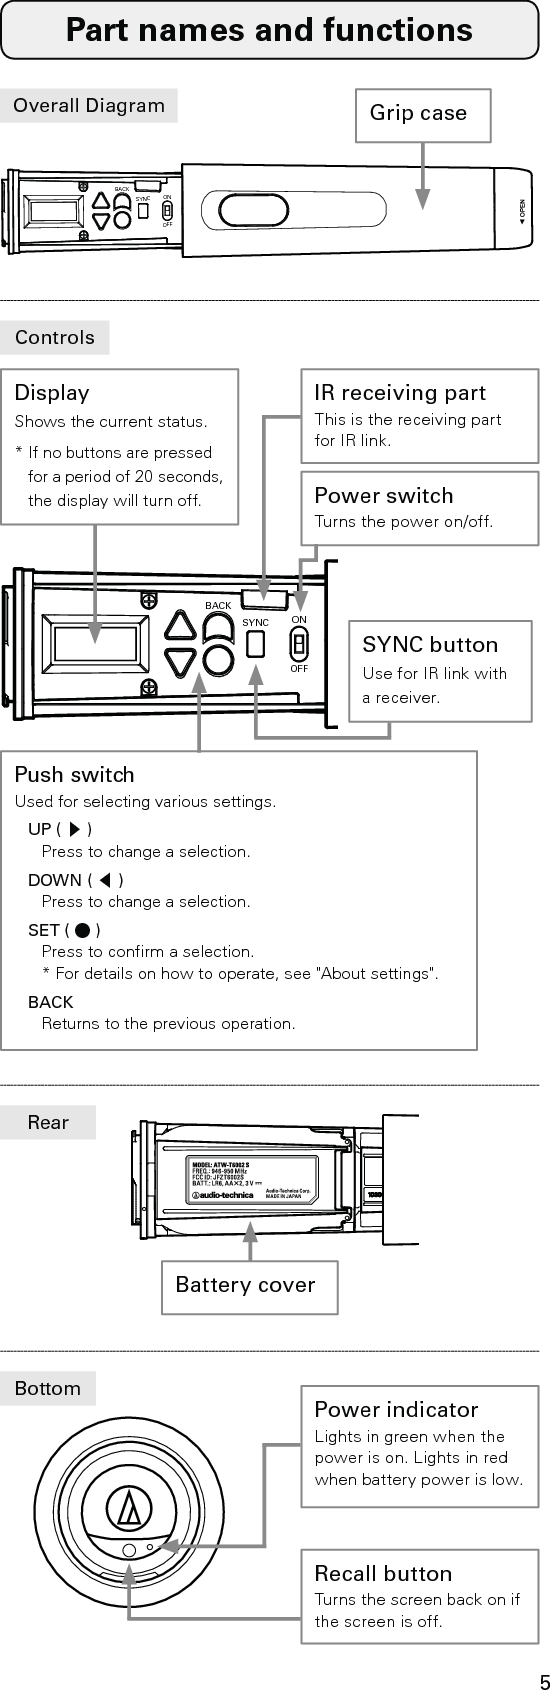 5Overall DiagramControlsONSYNCBACKOFFONSYNCBACKOFFGrip caseBattery coverPush switchUsed for selecting various settings.UP (▲)Press to change a selection.DOWN (▼) Press to change a selection.SET ( ●) Press to conrm a selection.* For details on how to operate, see &quot;About settings&quot;.BACK Returns to the previous operation.Part names and functionsDisplayShows the current status.* If no buttons are pressed for a period of 20 seconds, the display will turn off.IR receiving partThis is the receiving part for IR link.Power switchTurns the power on/off.SYNC buttonUse for IR link with a receiver.RearBottomPower indicatorLights in green when the power is on. Lights in red when battery power is low.Recall buttonTurns the screen back on if the screen is off.